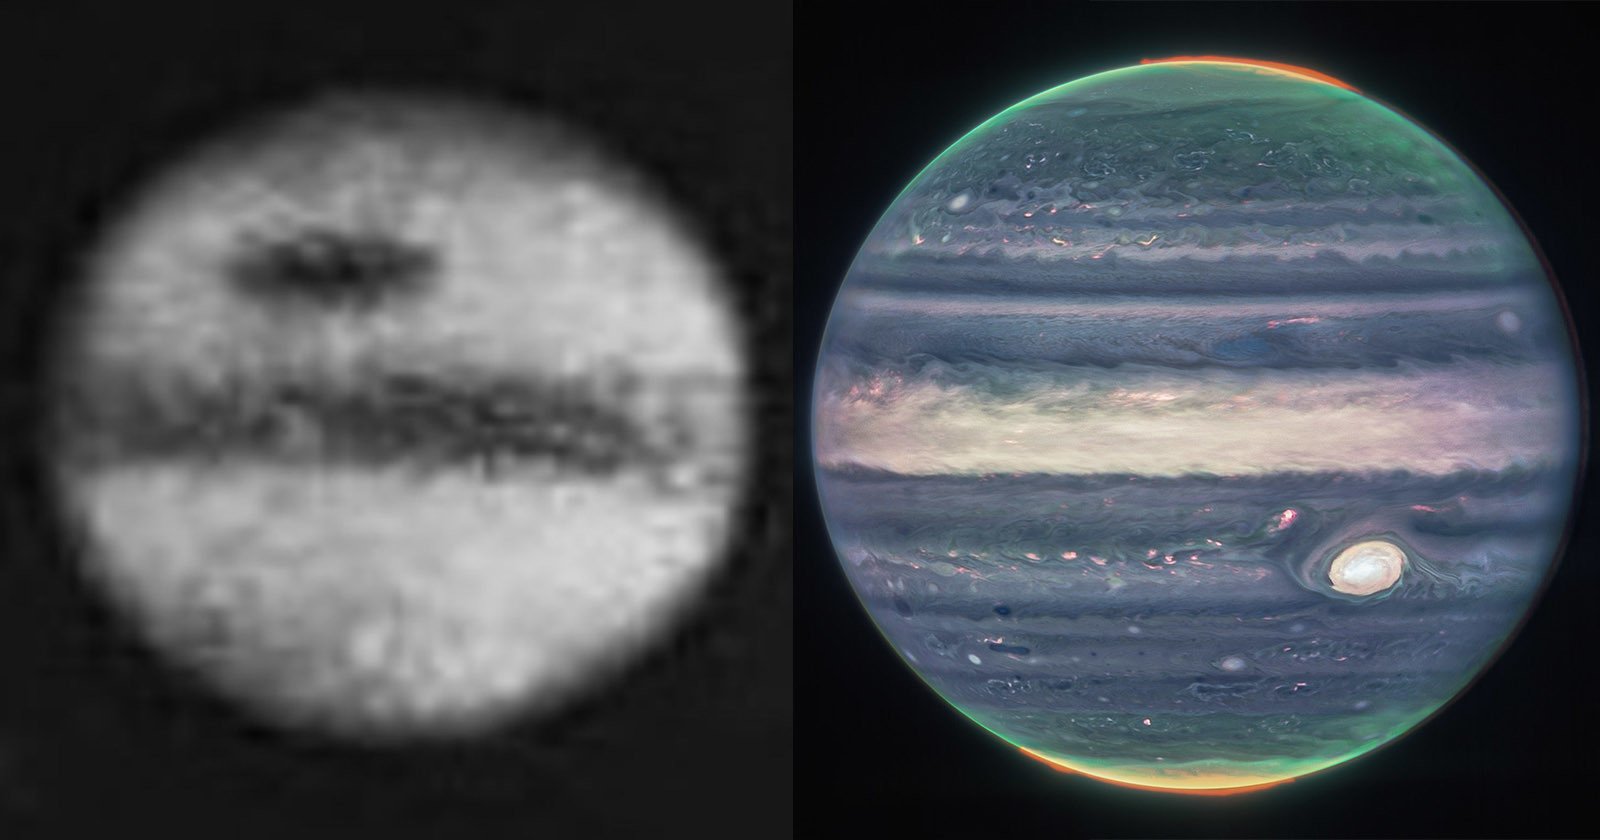 Then and Now: First Jupiter Photo vs James Webbs Latest Shot